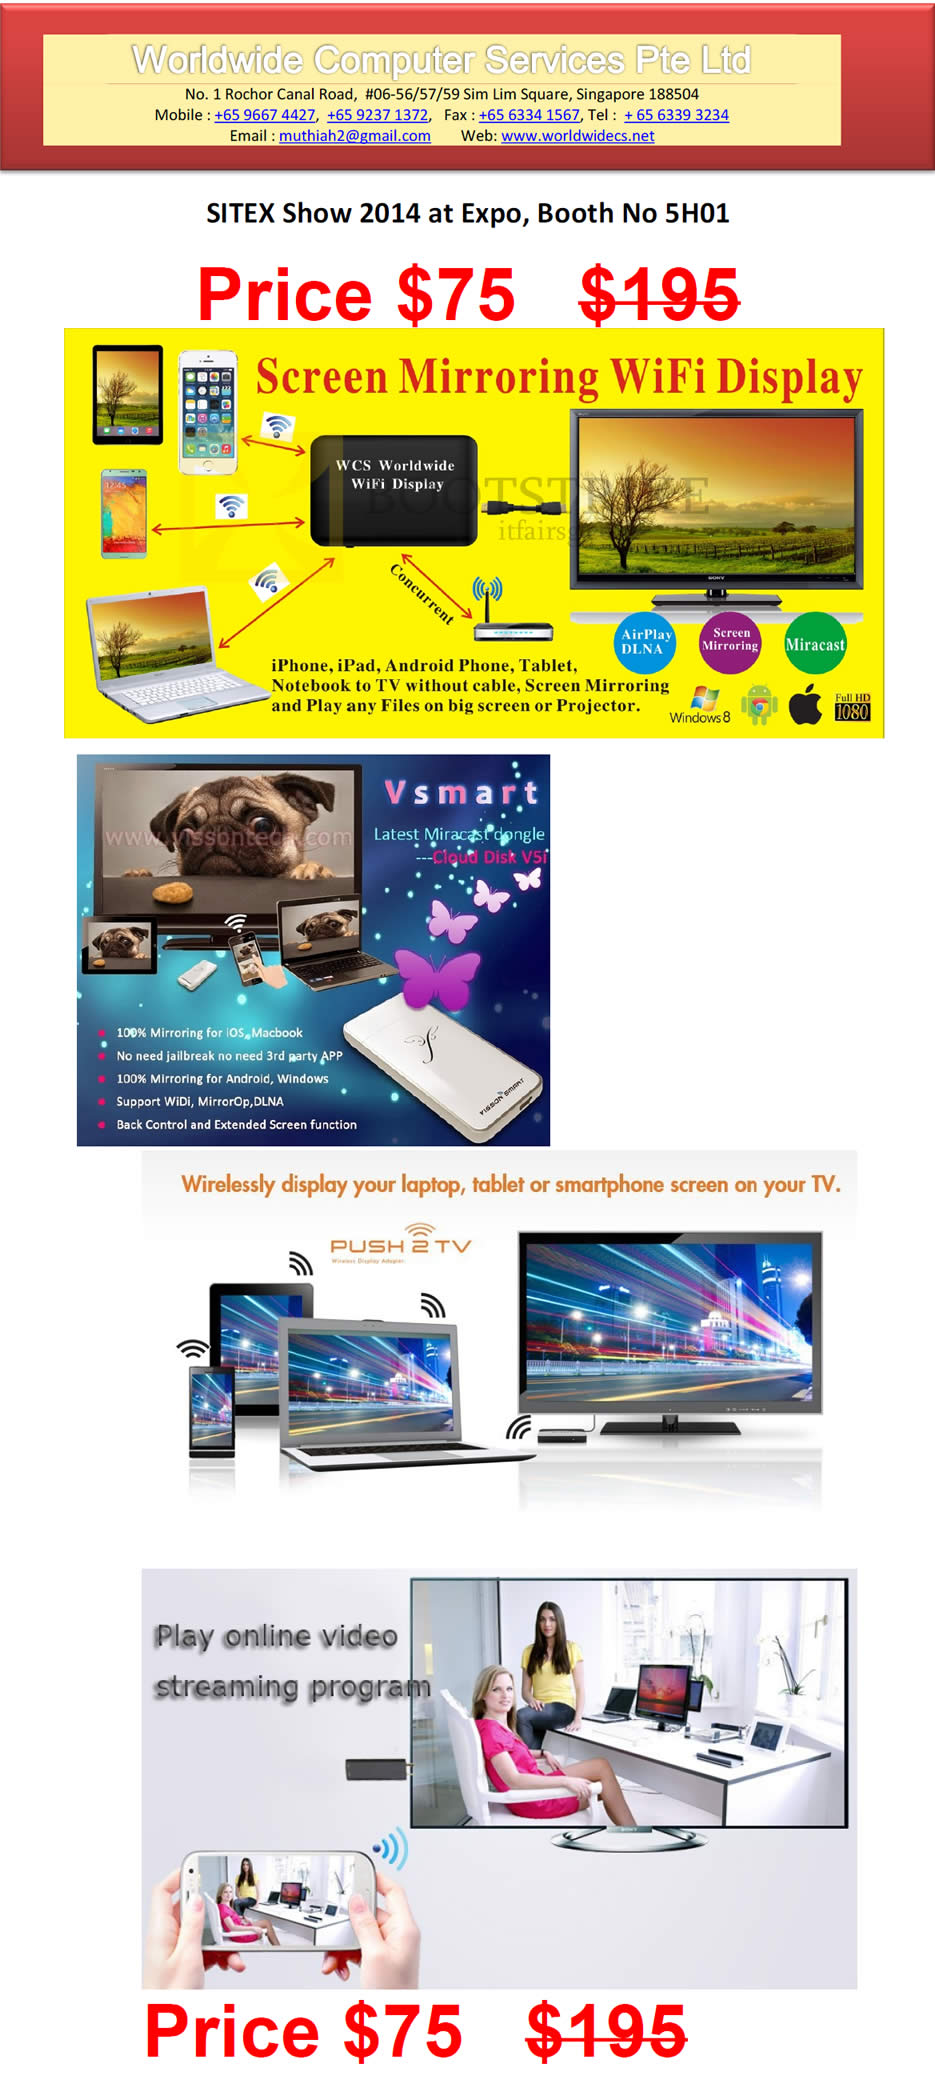 SITEX 2014 price list image brochure of Worldwide Computer Services Screen Mirroring Wifi Display